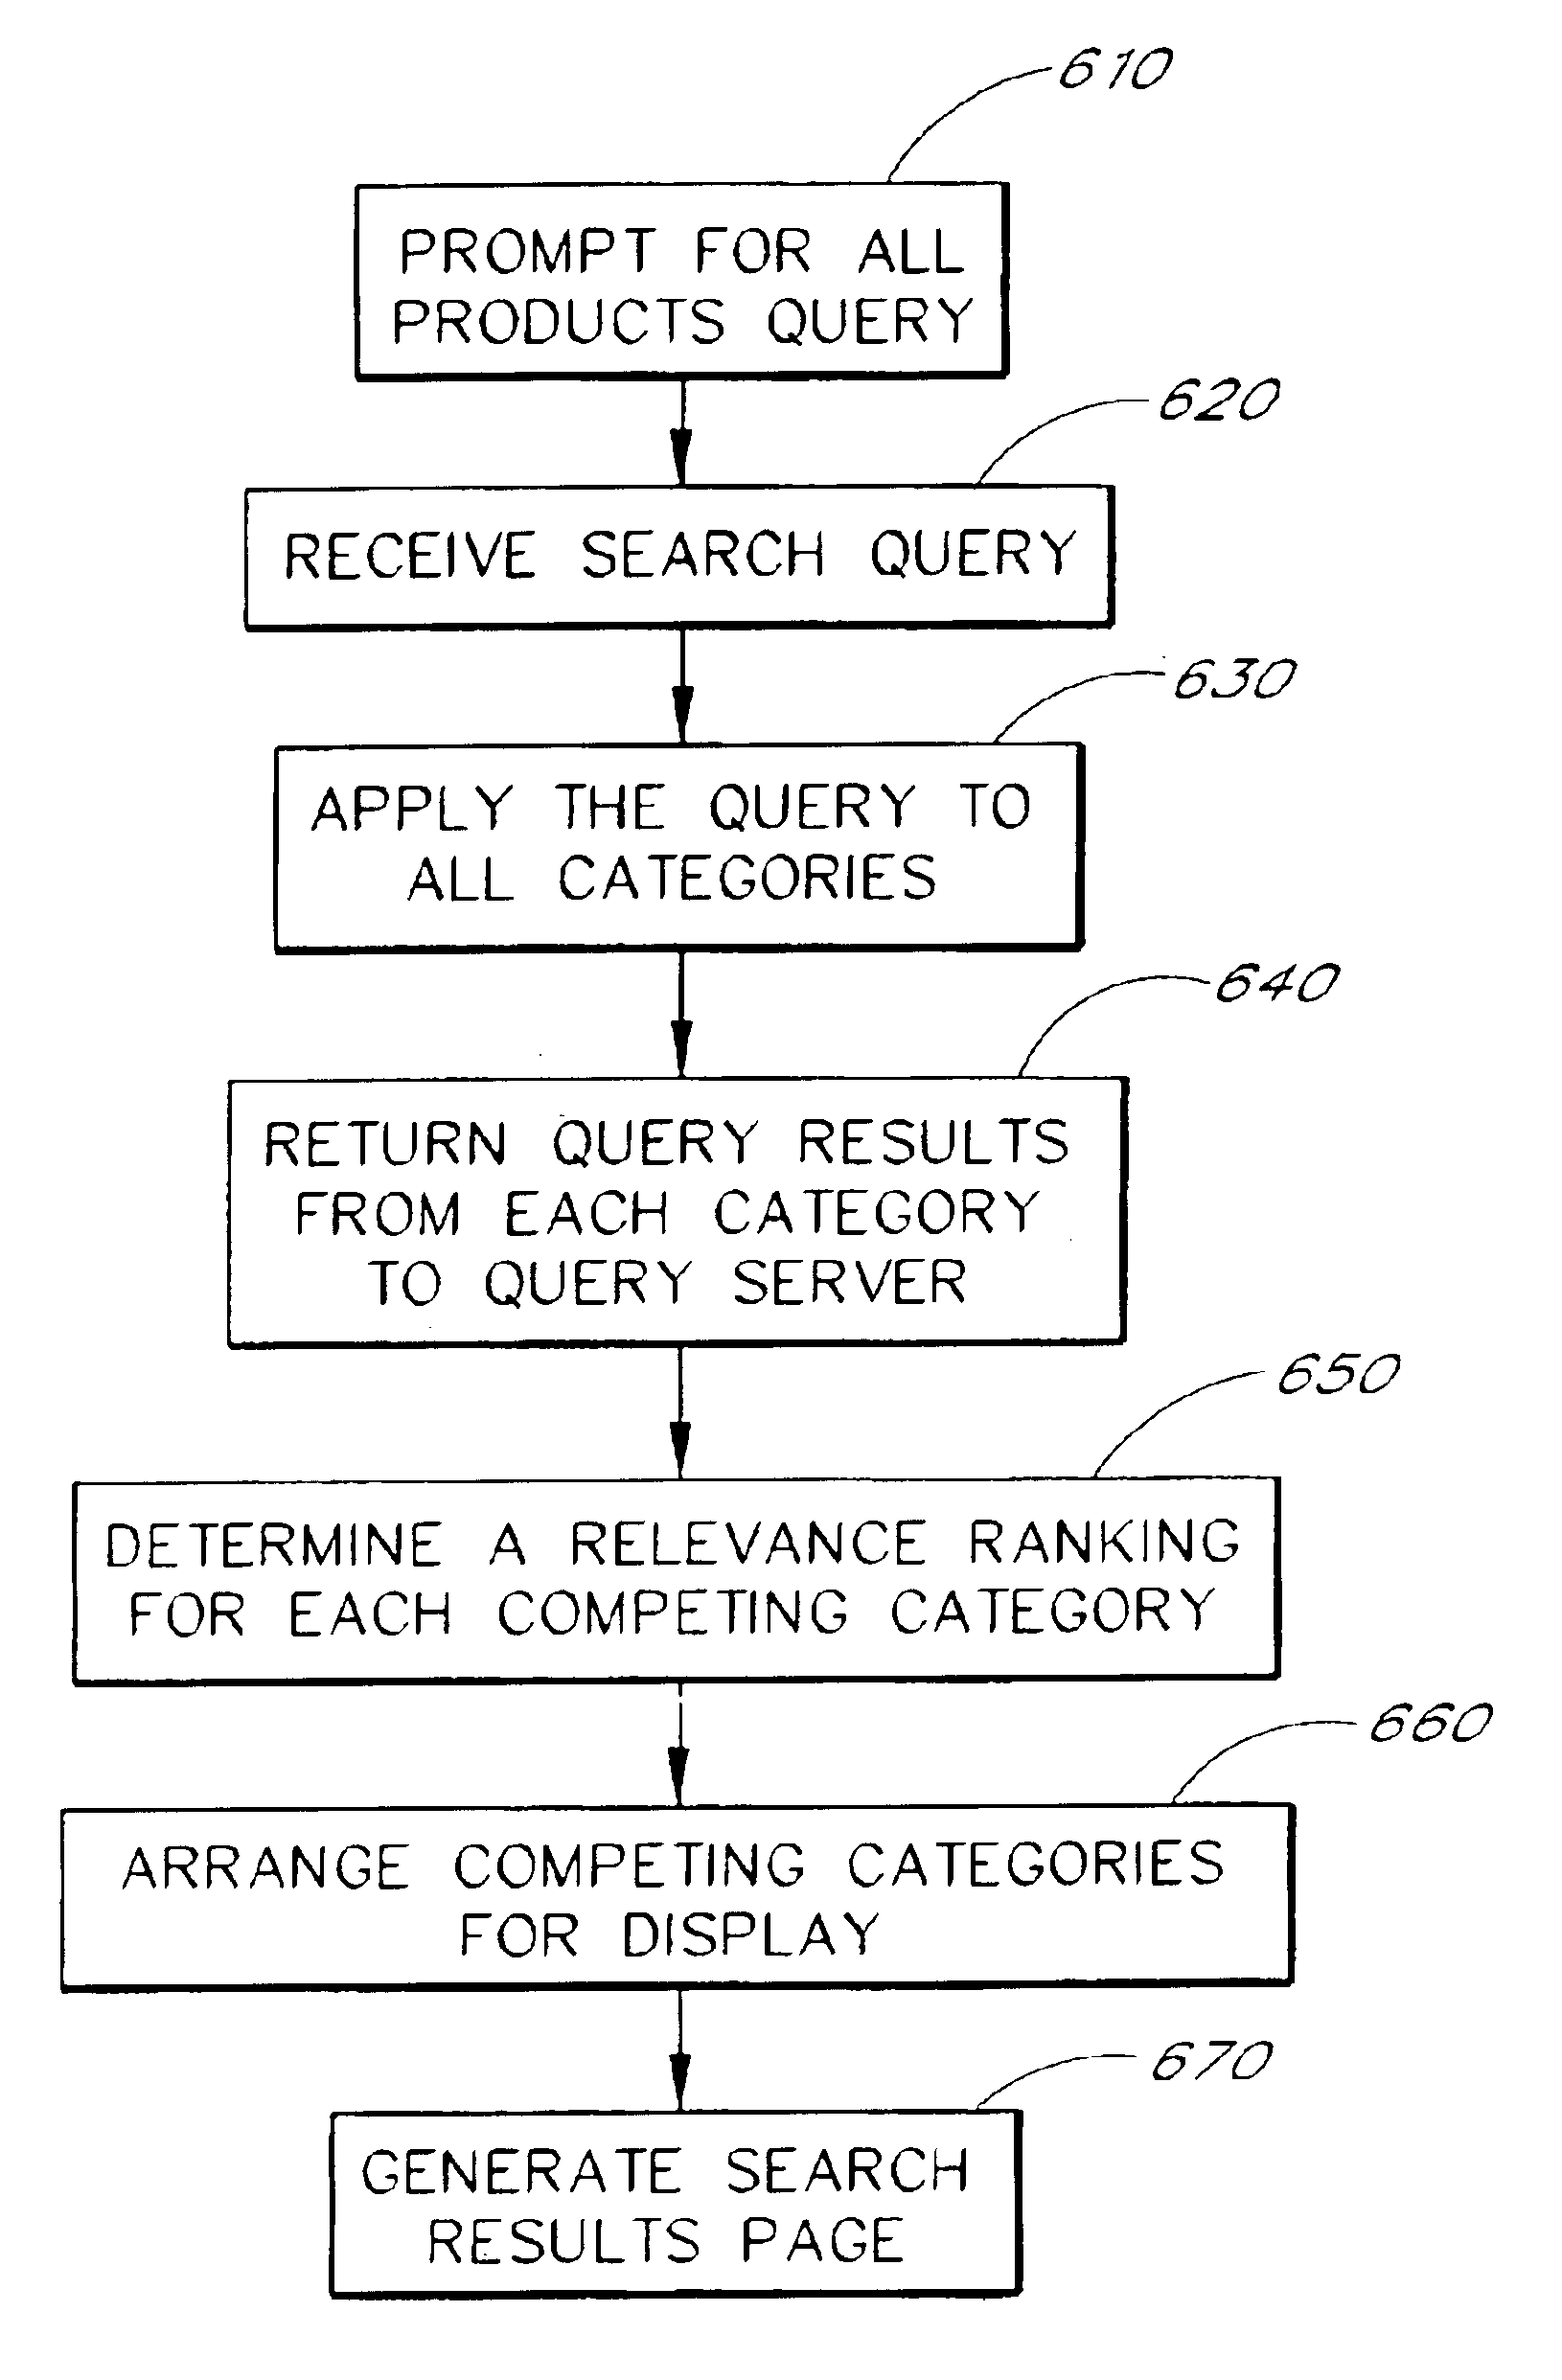 Search query processing to provide category-ranked presentation of search results